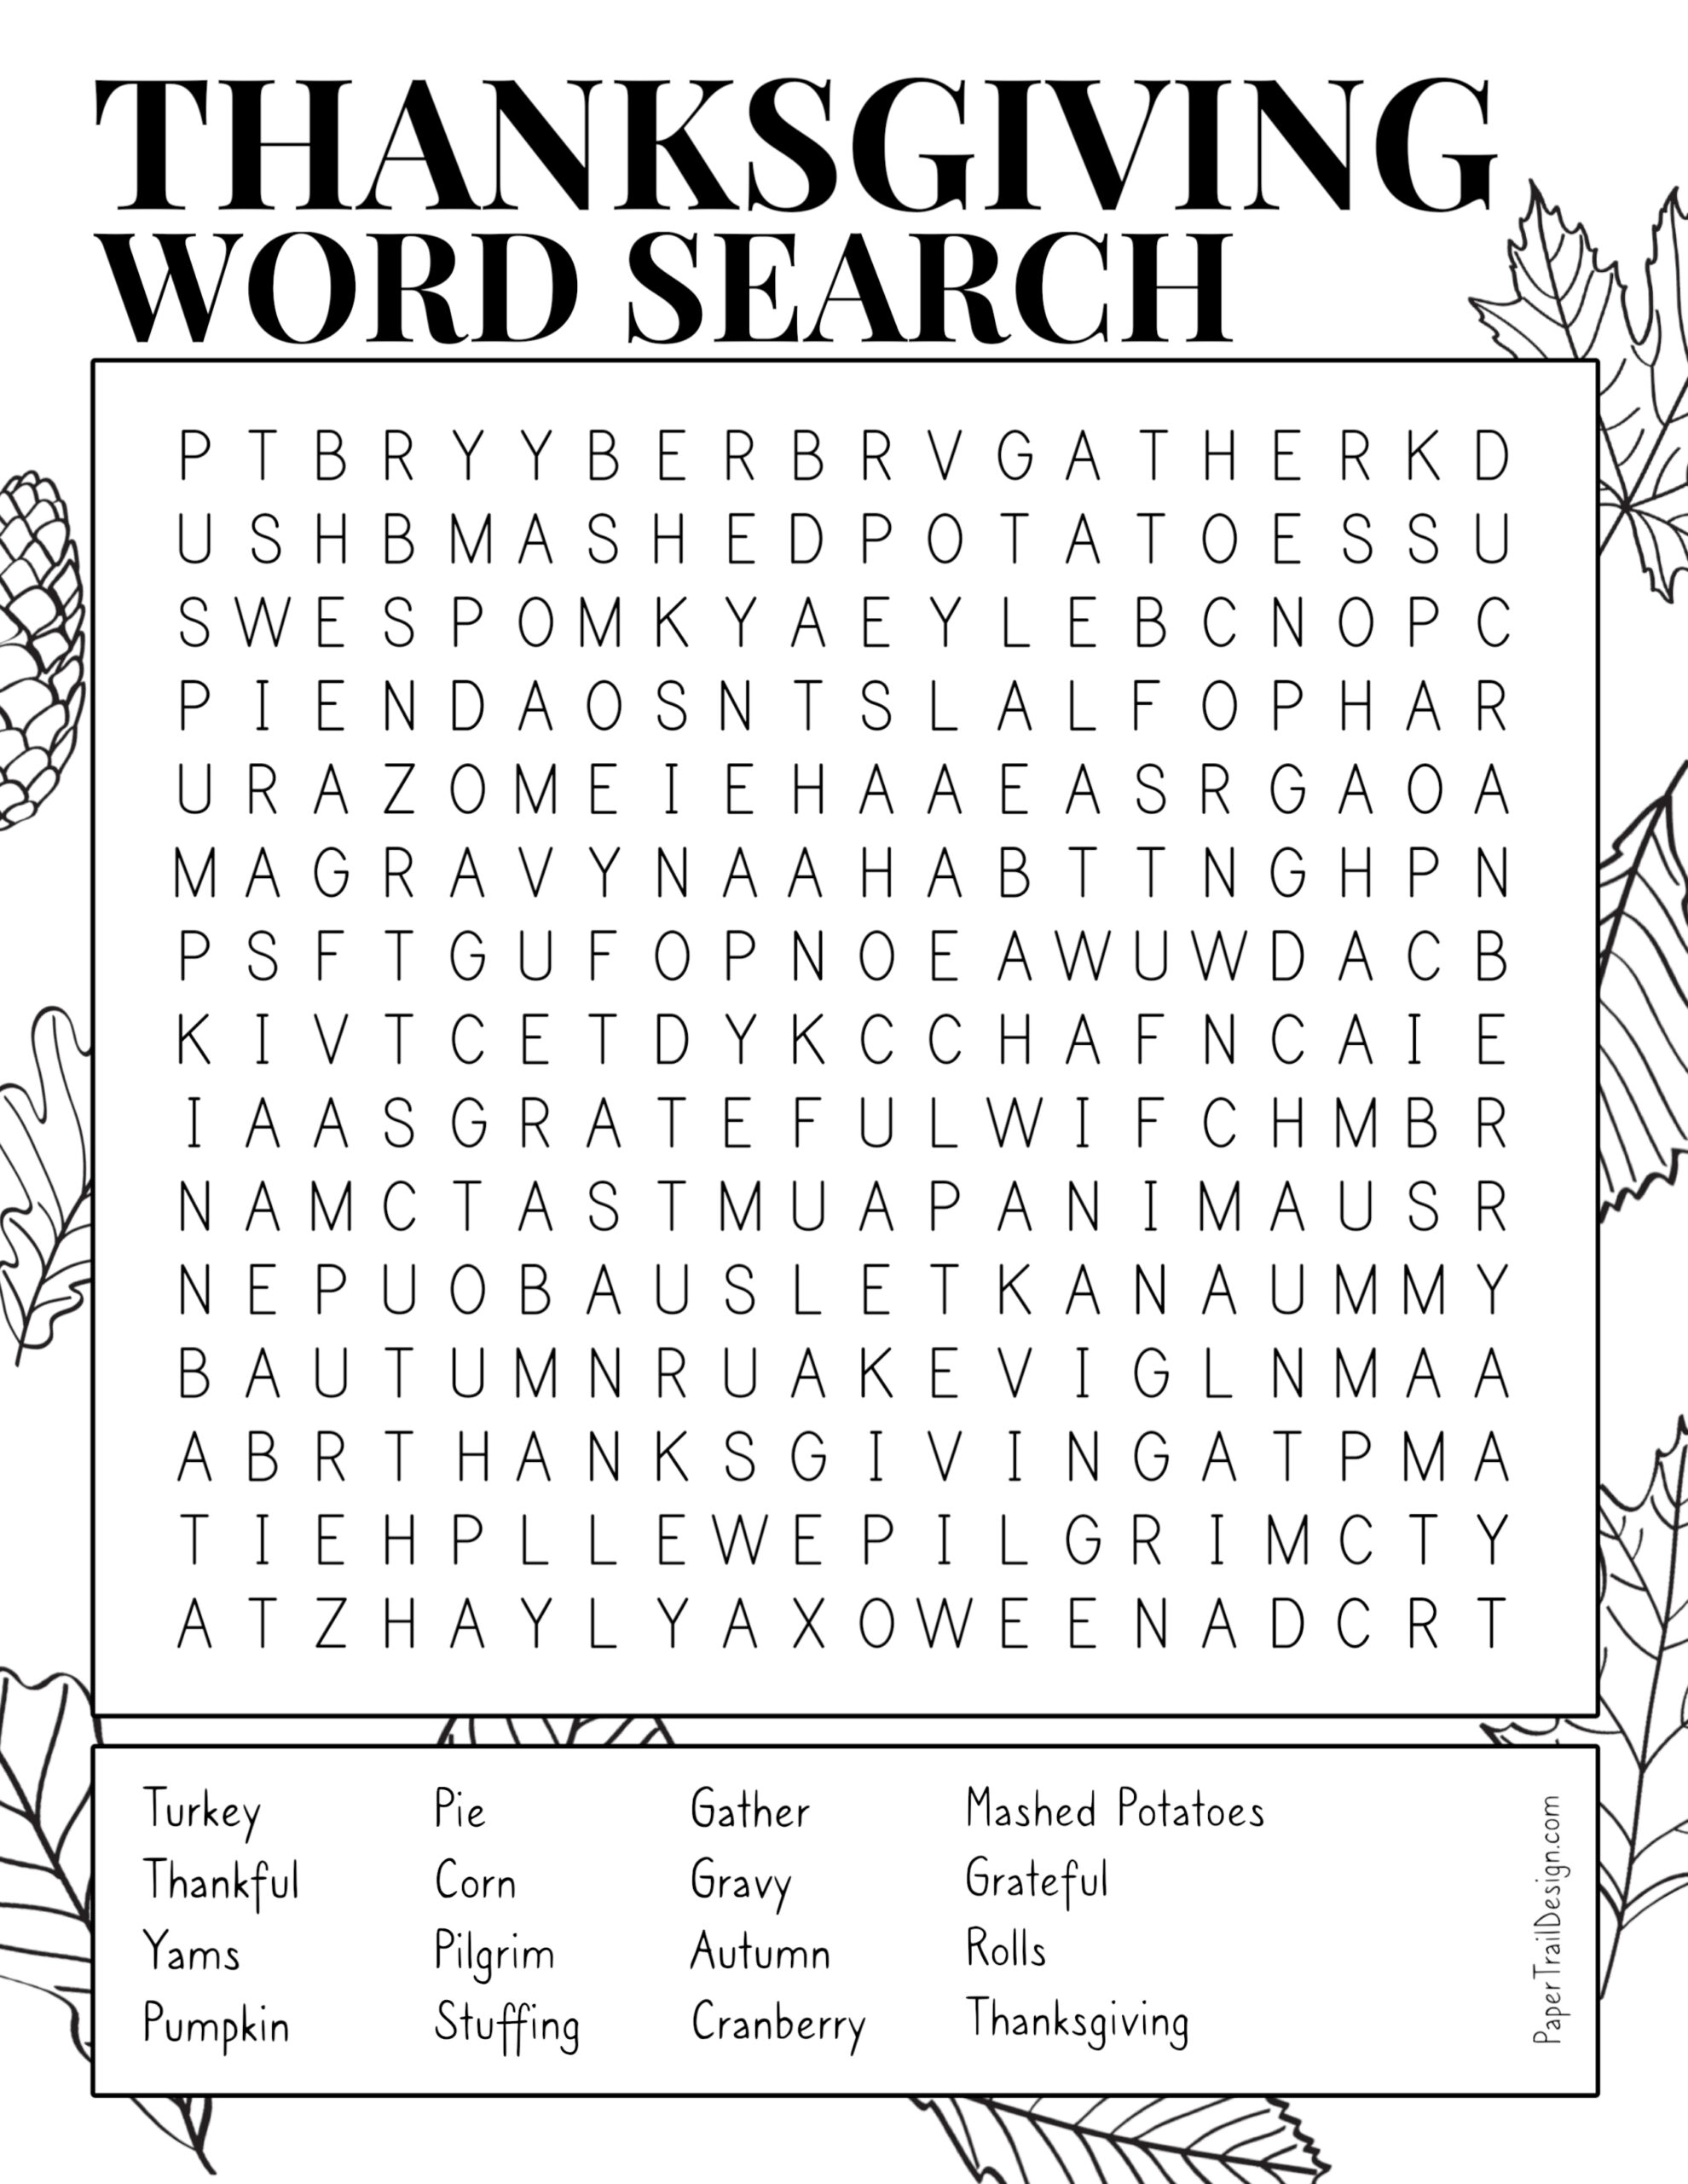 Thanksgiving Word Search Printable - Paper Trail Design